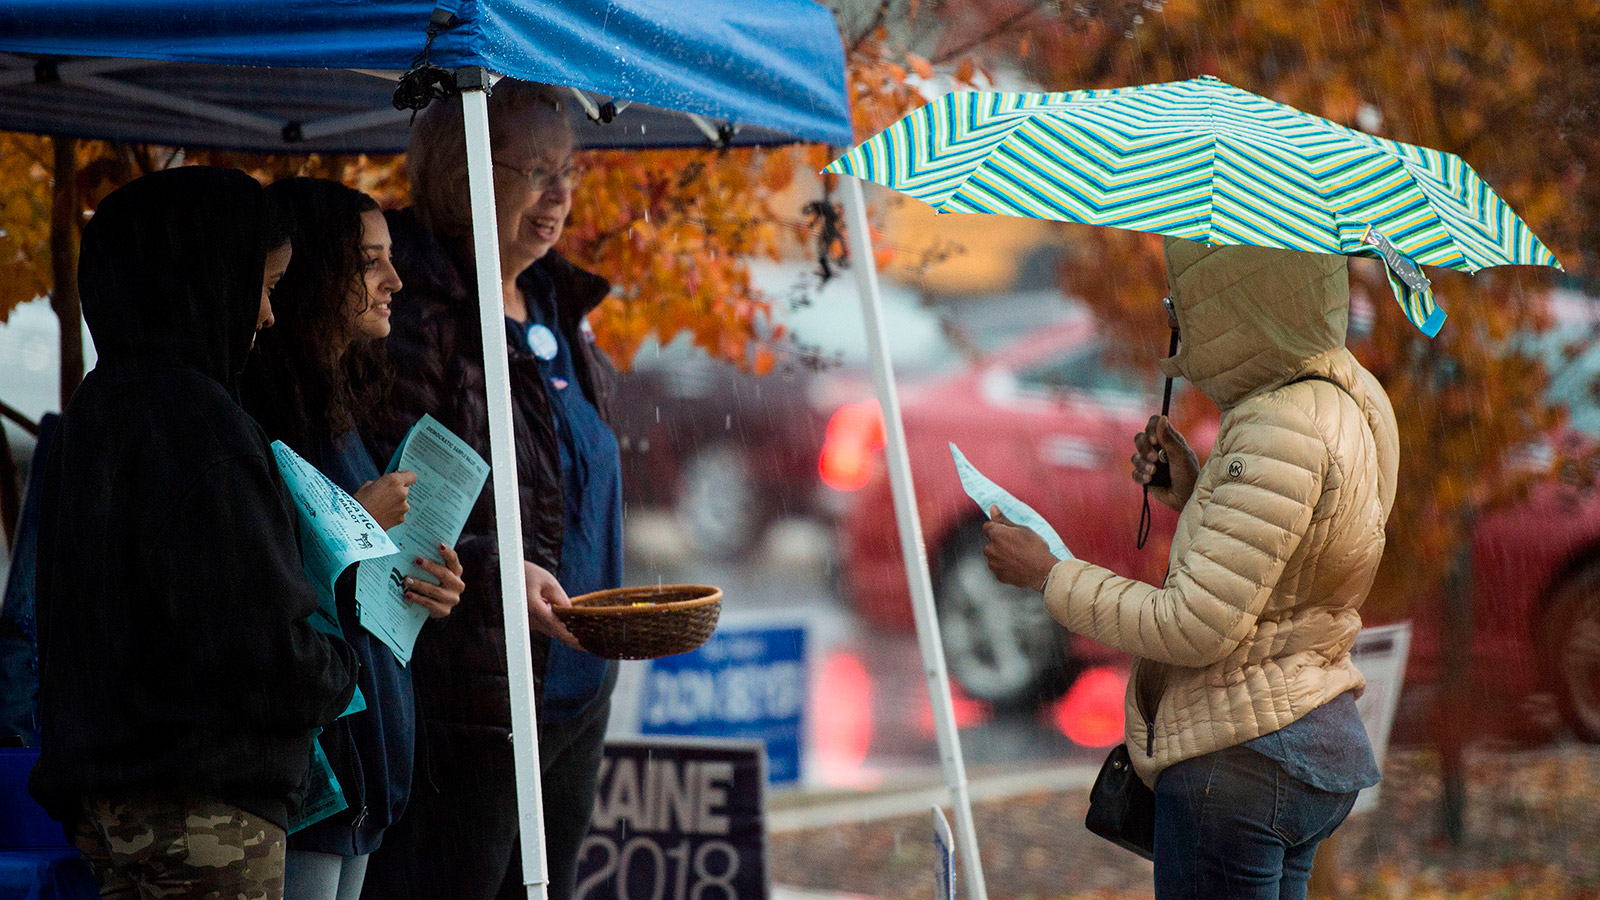 Volunteers with the Democratic party speak to voters outside of a polling station during the mid-term elections at the Fairfax County bus garage in Lorton, Virginia on November 6, 2018.